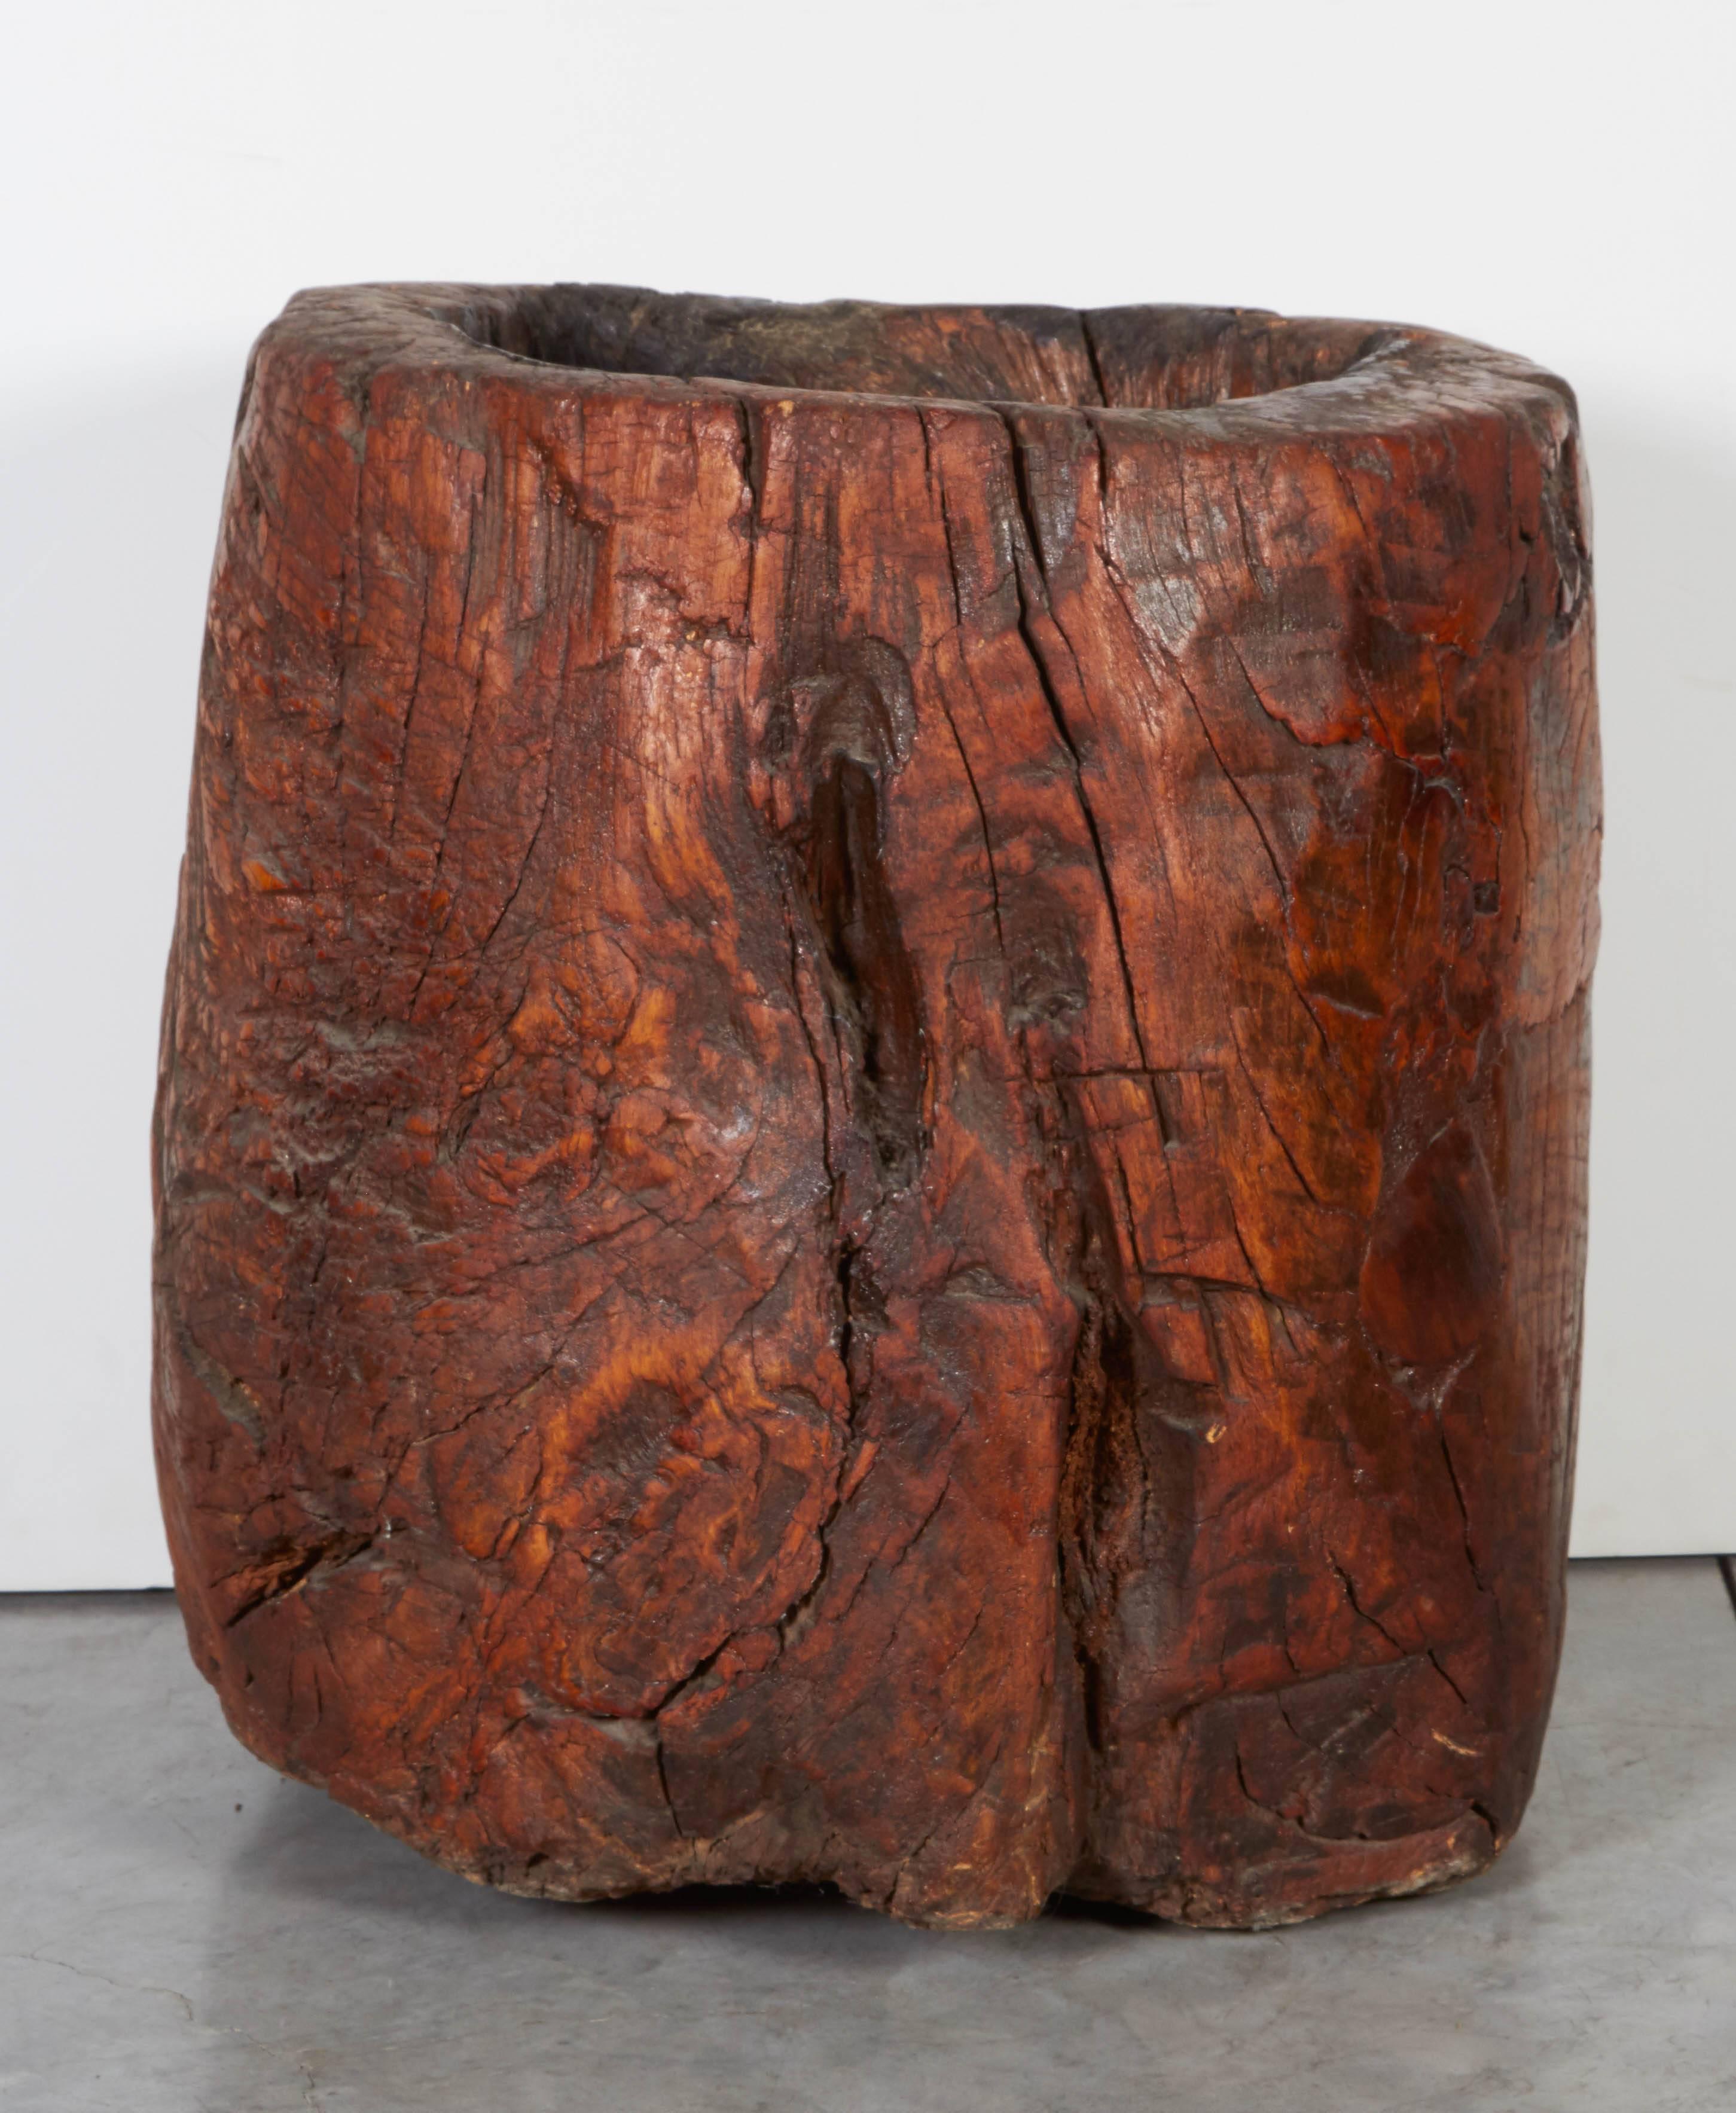 A tall and heavy antique Chinese mortar carved out of a single piece of burl wood with thick walls, great patina, and tremendous presence. Burl wood mortars of this size, age and condition are a real find. 
M581g.